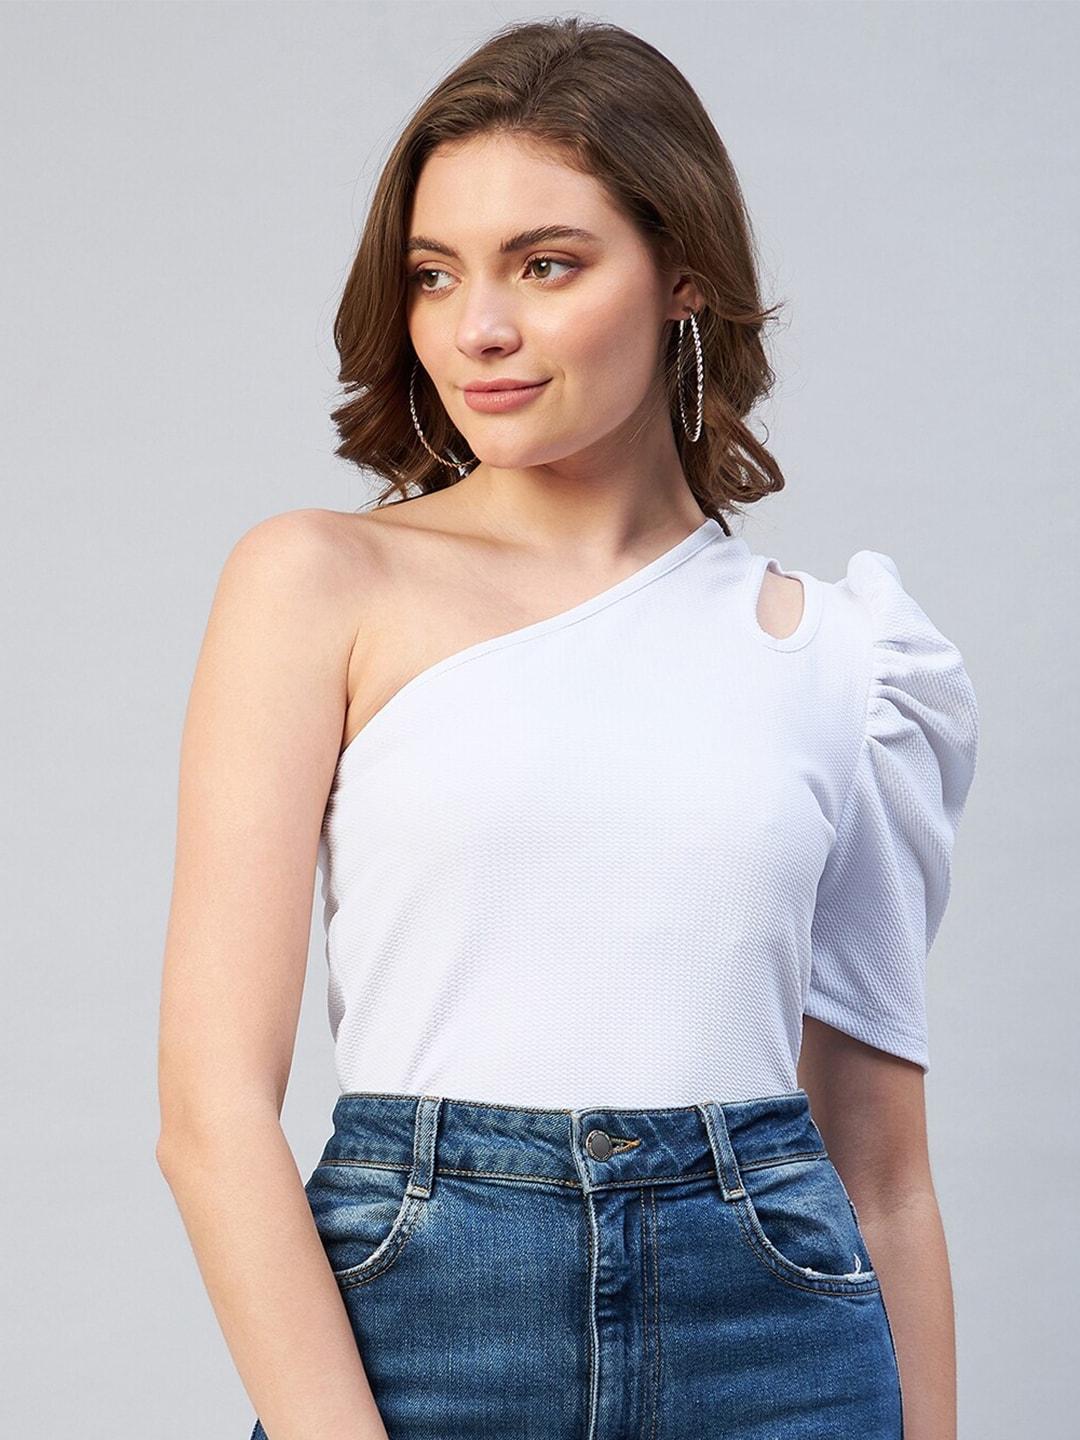 marie claire white one shoulder top